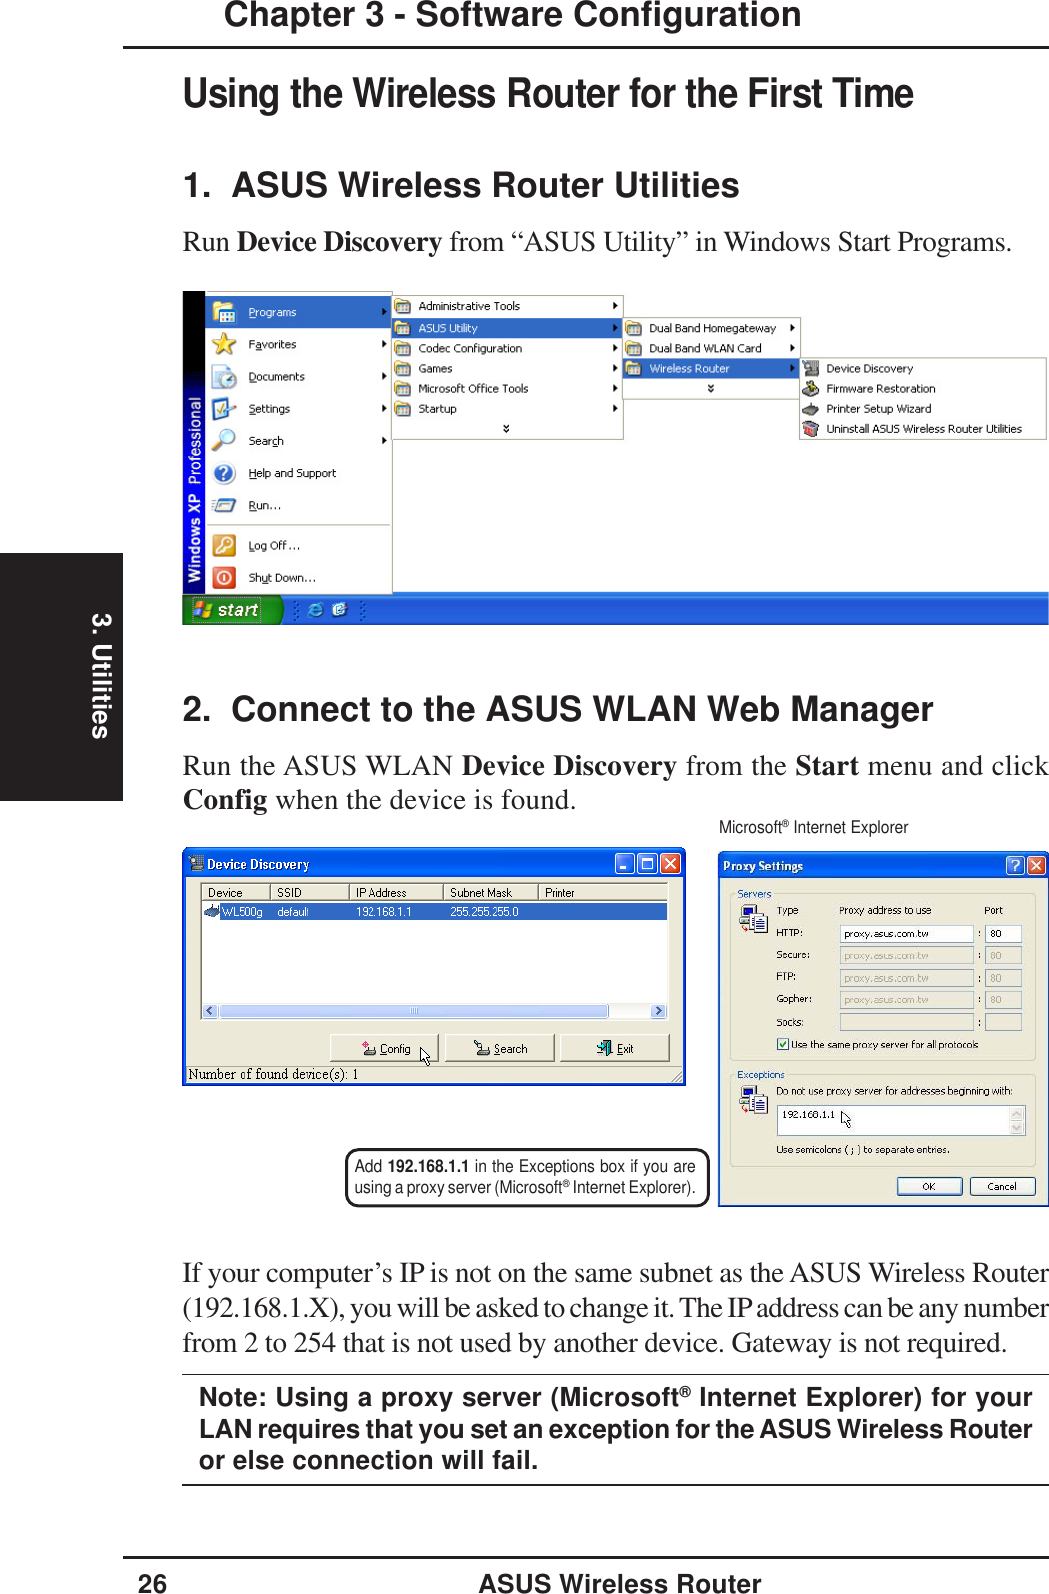 3. Utilities26 ASUS Wireless RouterChapter 3 - Software ConfigurationUsing the Wireless Router for the First Time1.  ASUS Wireless Router UtilitiesRun Device Discovery from “ASUS Utility” in Windows Start Programs.2.  Connect to the ASUS WLAN Web ManagerRun the ASUS WLAN Device Discovery from the Start menu and clickConfig when the device is found.If your computer’s IP is not on the same subnet as the ASUS Wireless Router(192.168.1.X), you will be asked to change it. The IP address can be any numberfrom 2 to 254 that is not used by another device. Gateway is not required.Note: Using a proxy server (Microsoft® Internet Explorer) for yourLAN requires that you set an exception for the ASUS Wireless Routeror else connection will fail.Add 192.168.1.1 in the Exceptions box if you areusing a proxy server (Microsoft® Internet Explorer).Microsoft® Internet Explorer